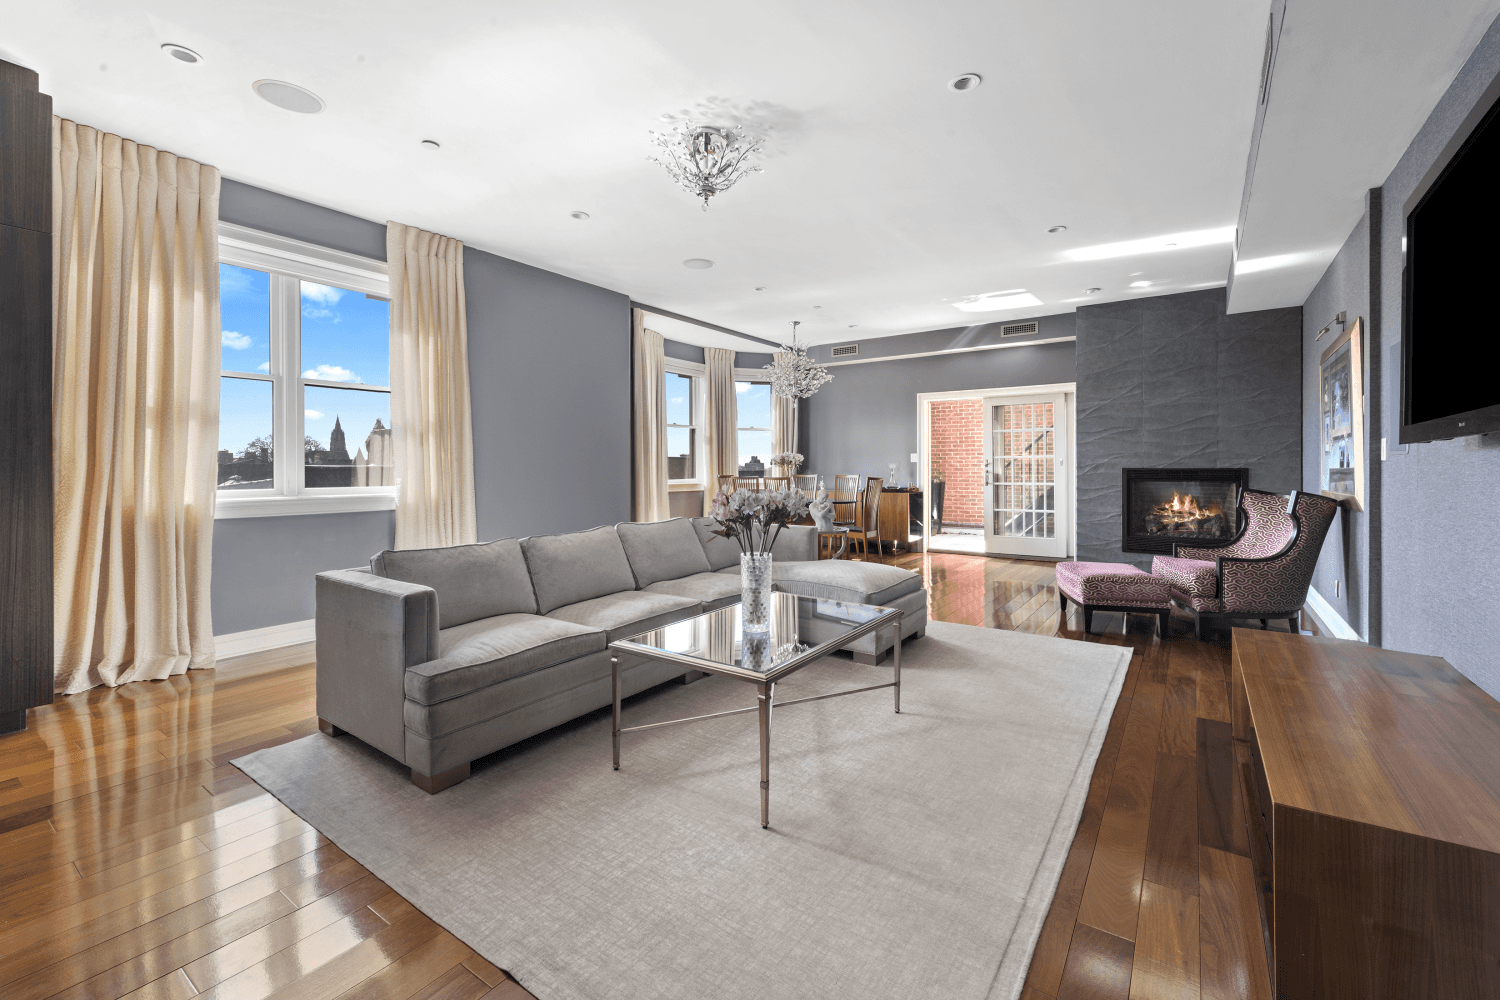 Enter the lap of luxury in this exquisitely renovated townhouse nestled at 351 22nd St.